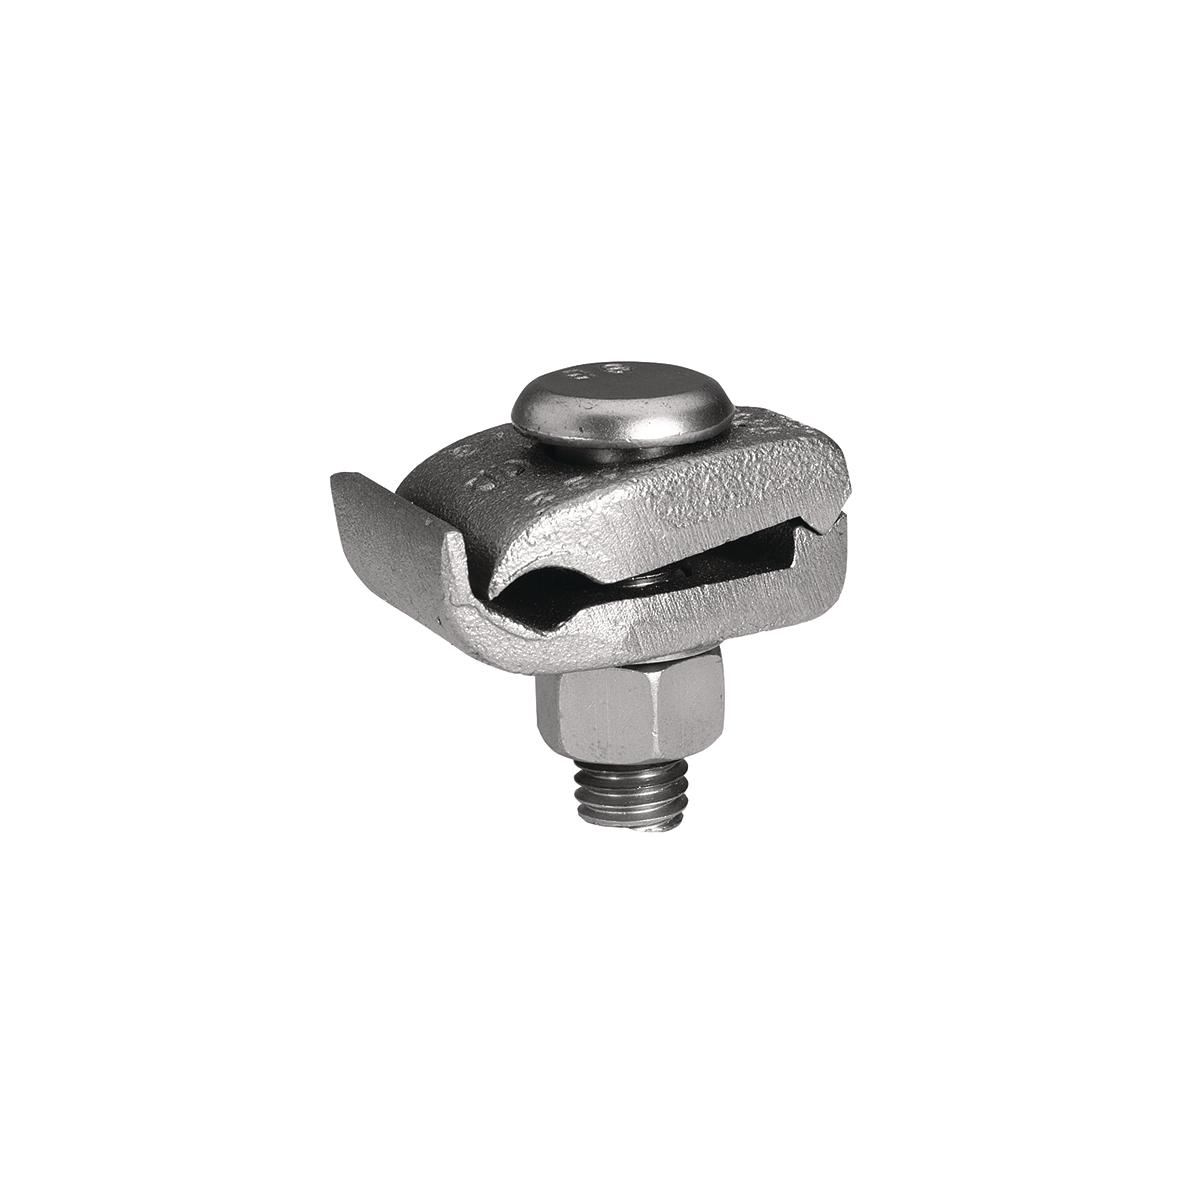 Hubbell GB29TN Mechanical Grounding Connector, Cable to 1/4" Thick Bar, 2/0 AWG (Sol) -250 kcmil, 1/2" Stud, Tin Plated. 